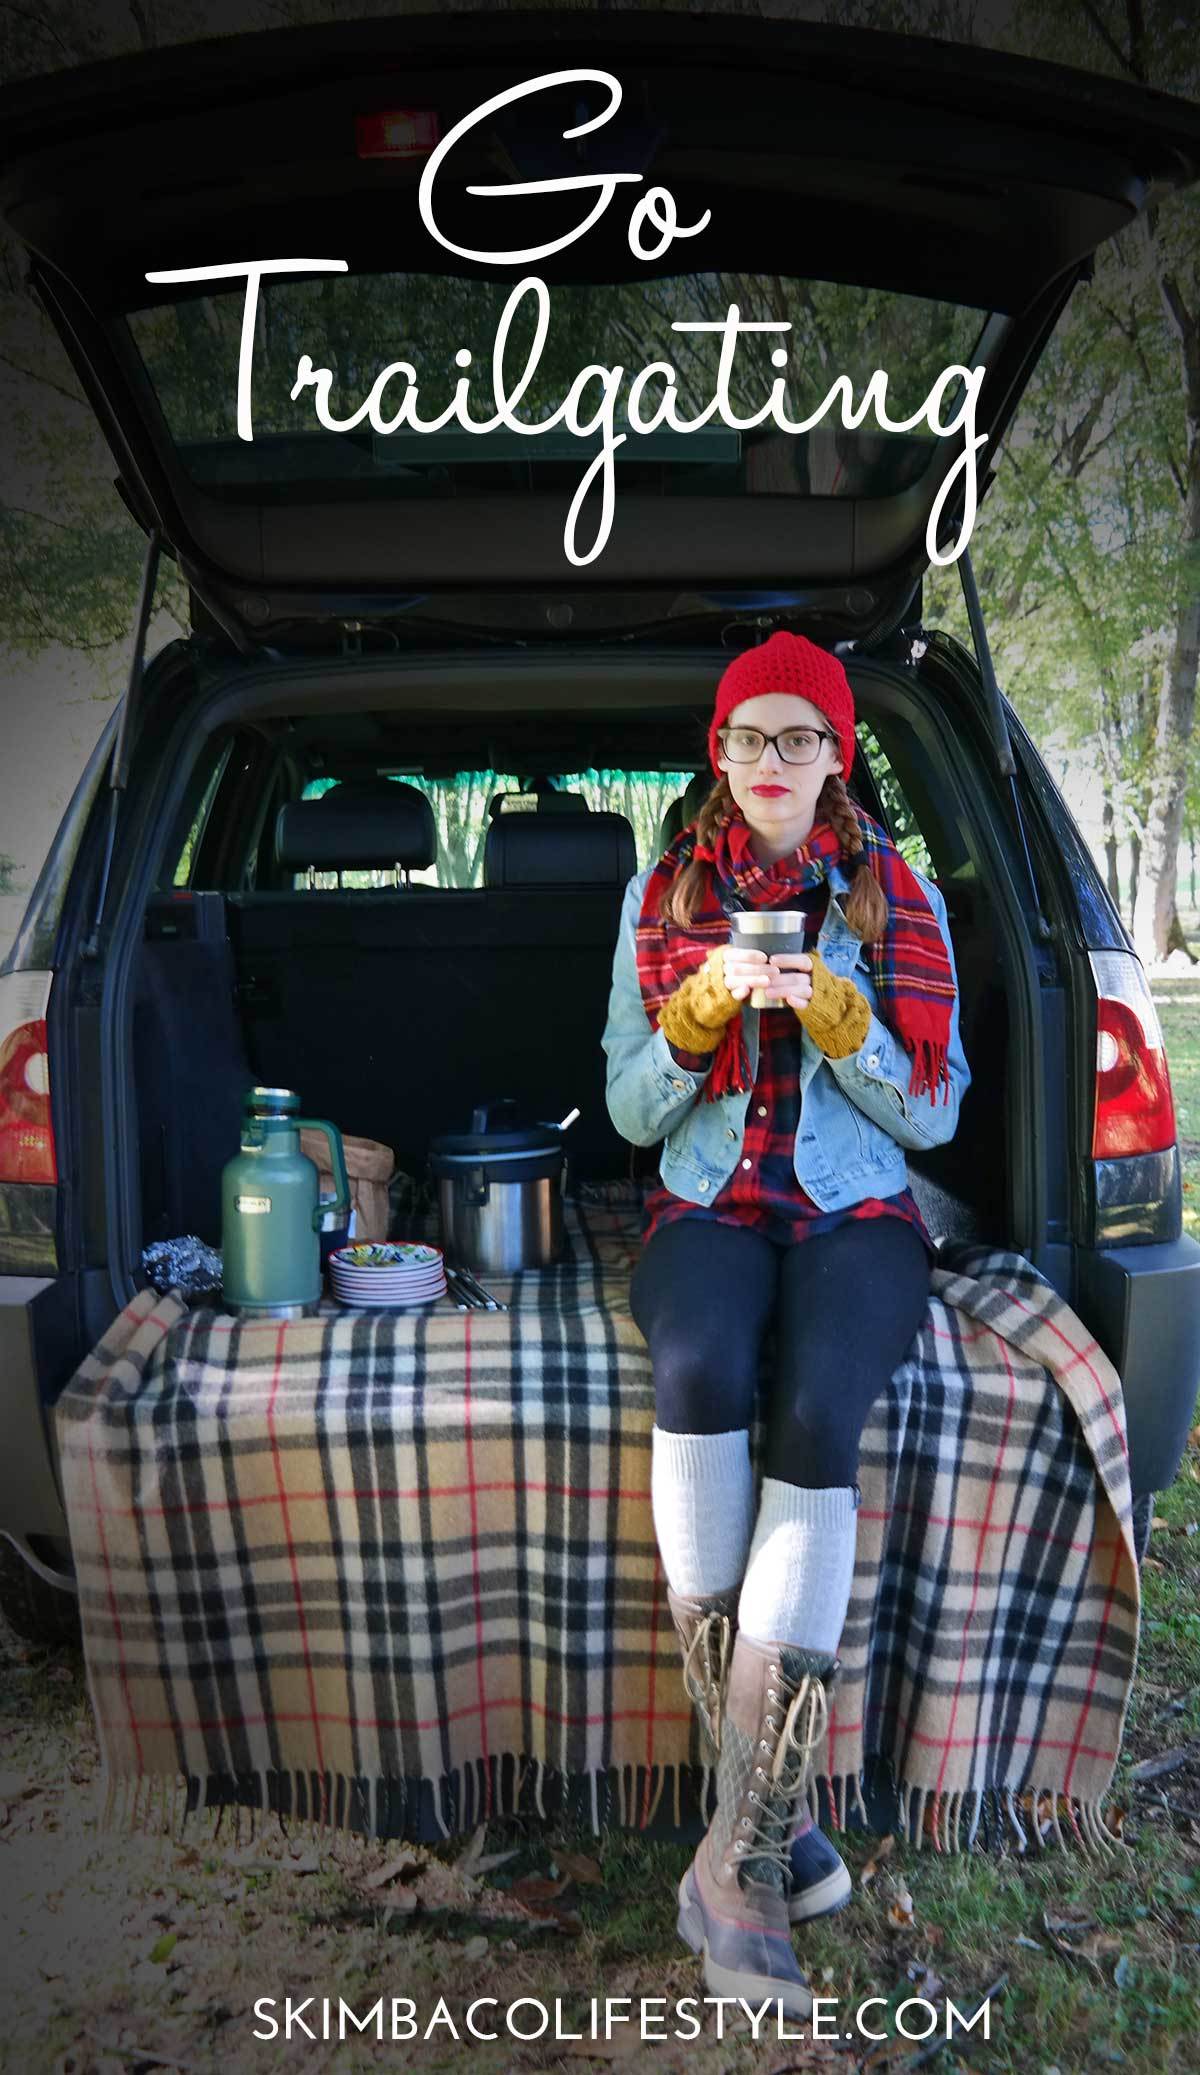 Go trailgating! Take the party outdoors and bring your lunch for hikes and have god old tailgating by the trail!